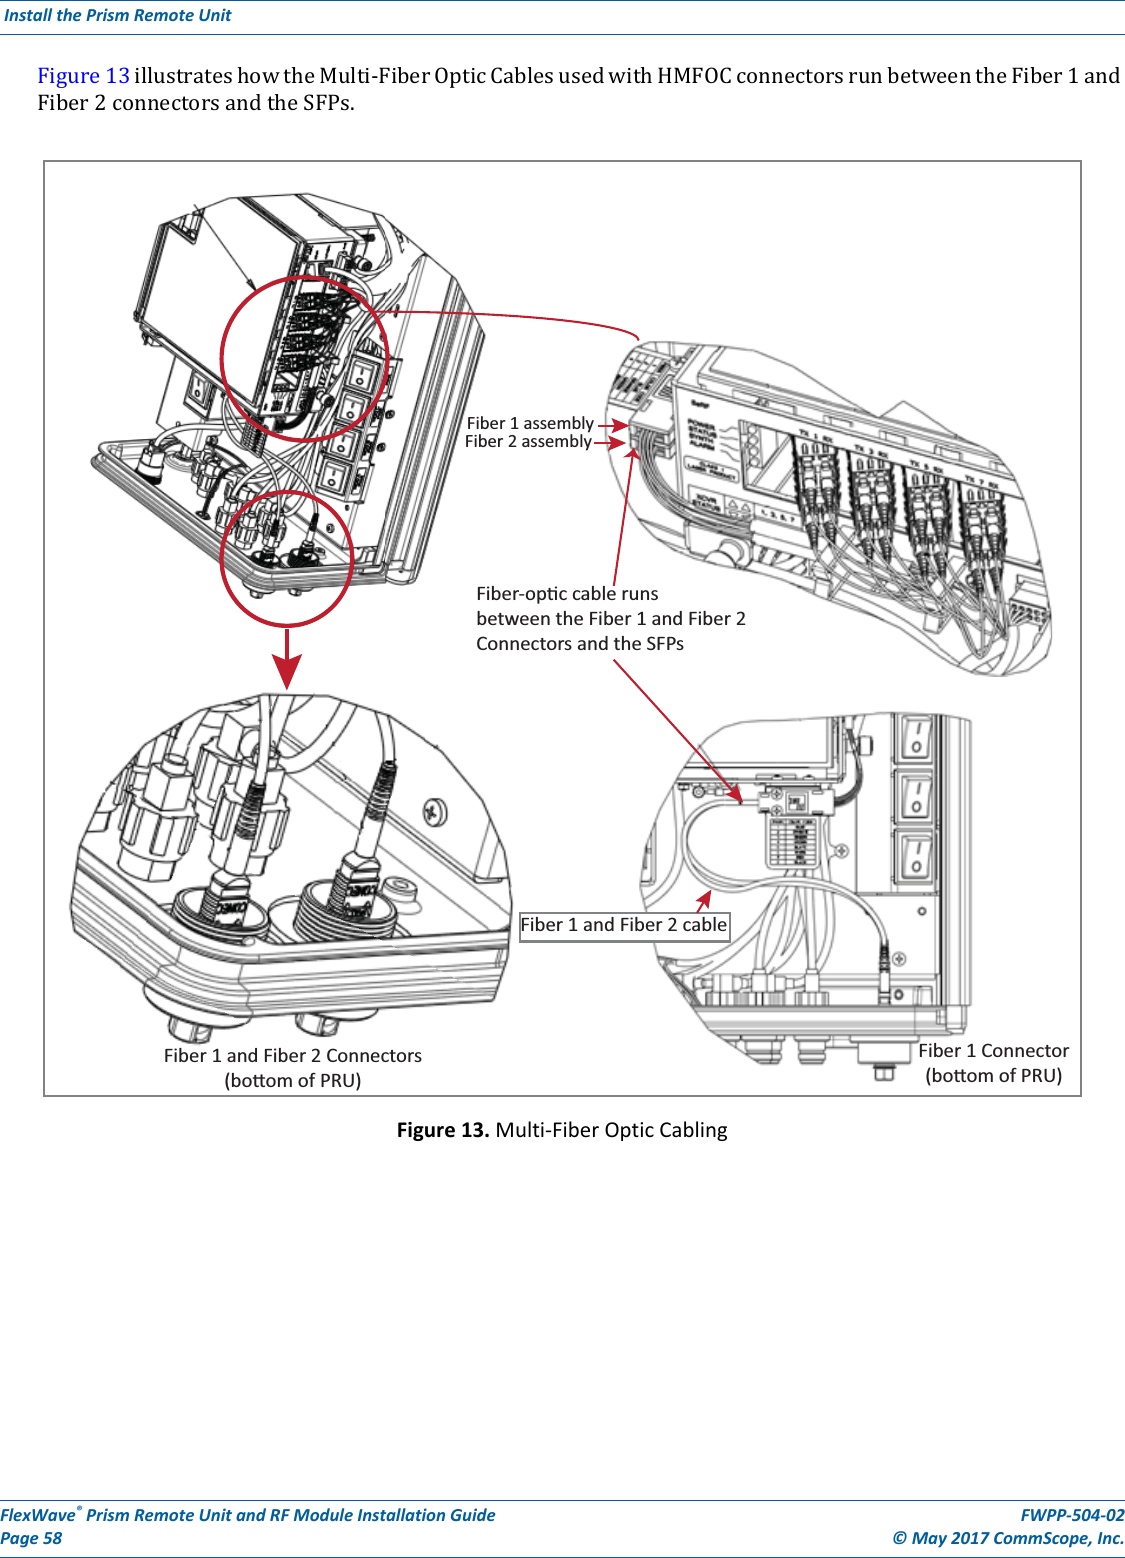 FlexWave® Prism Remote Unit and RF Module Installation Guide FWPP-504-02Page 58 © May 2017 CommScope, Inc. Install the Prism Remote Unit  Figure13illustrateshowtheMulti-FiberOpticCablesusedwithHMFOCconnectorsrunbetweentheFiber1andFiber2connectorsandtheSFPs.Figure 13. Multi-Fiber Optic CablingFiber 1 and Fiber 2 Connectors(boom of PRU)Fiber-opc cable runsbetween the Fiber 1 and Fiber 2 Connectors and the SFPsFiber 1 assemblyFiber 2 assemblyFiber 1 and Fiber 2 cableFiber 1 Connector(boom of PRU)